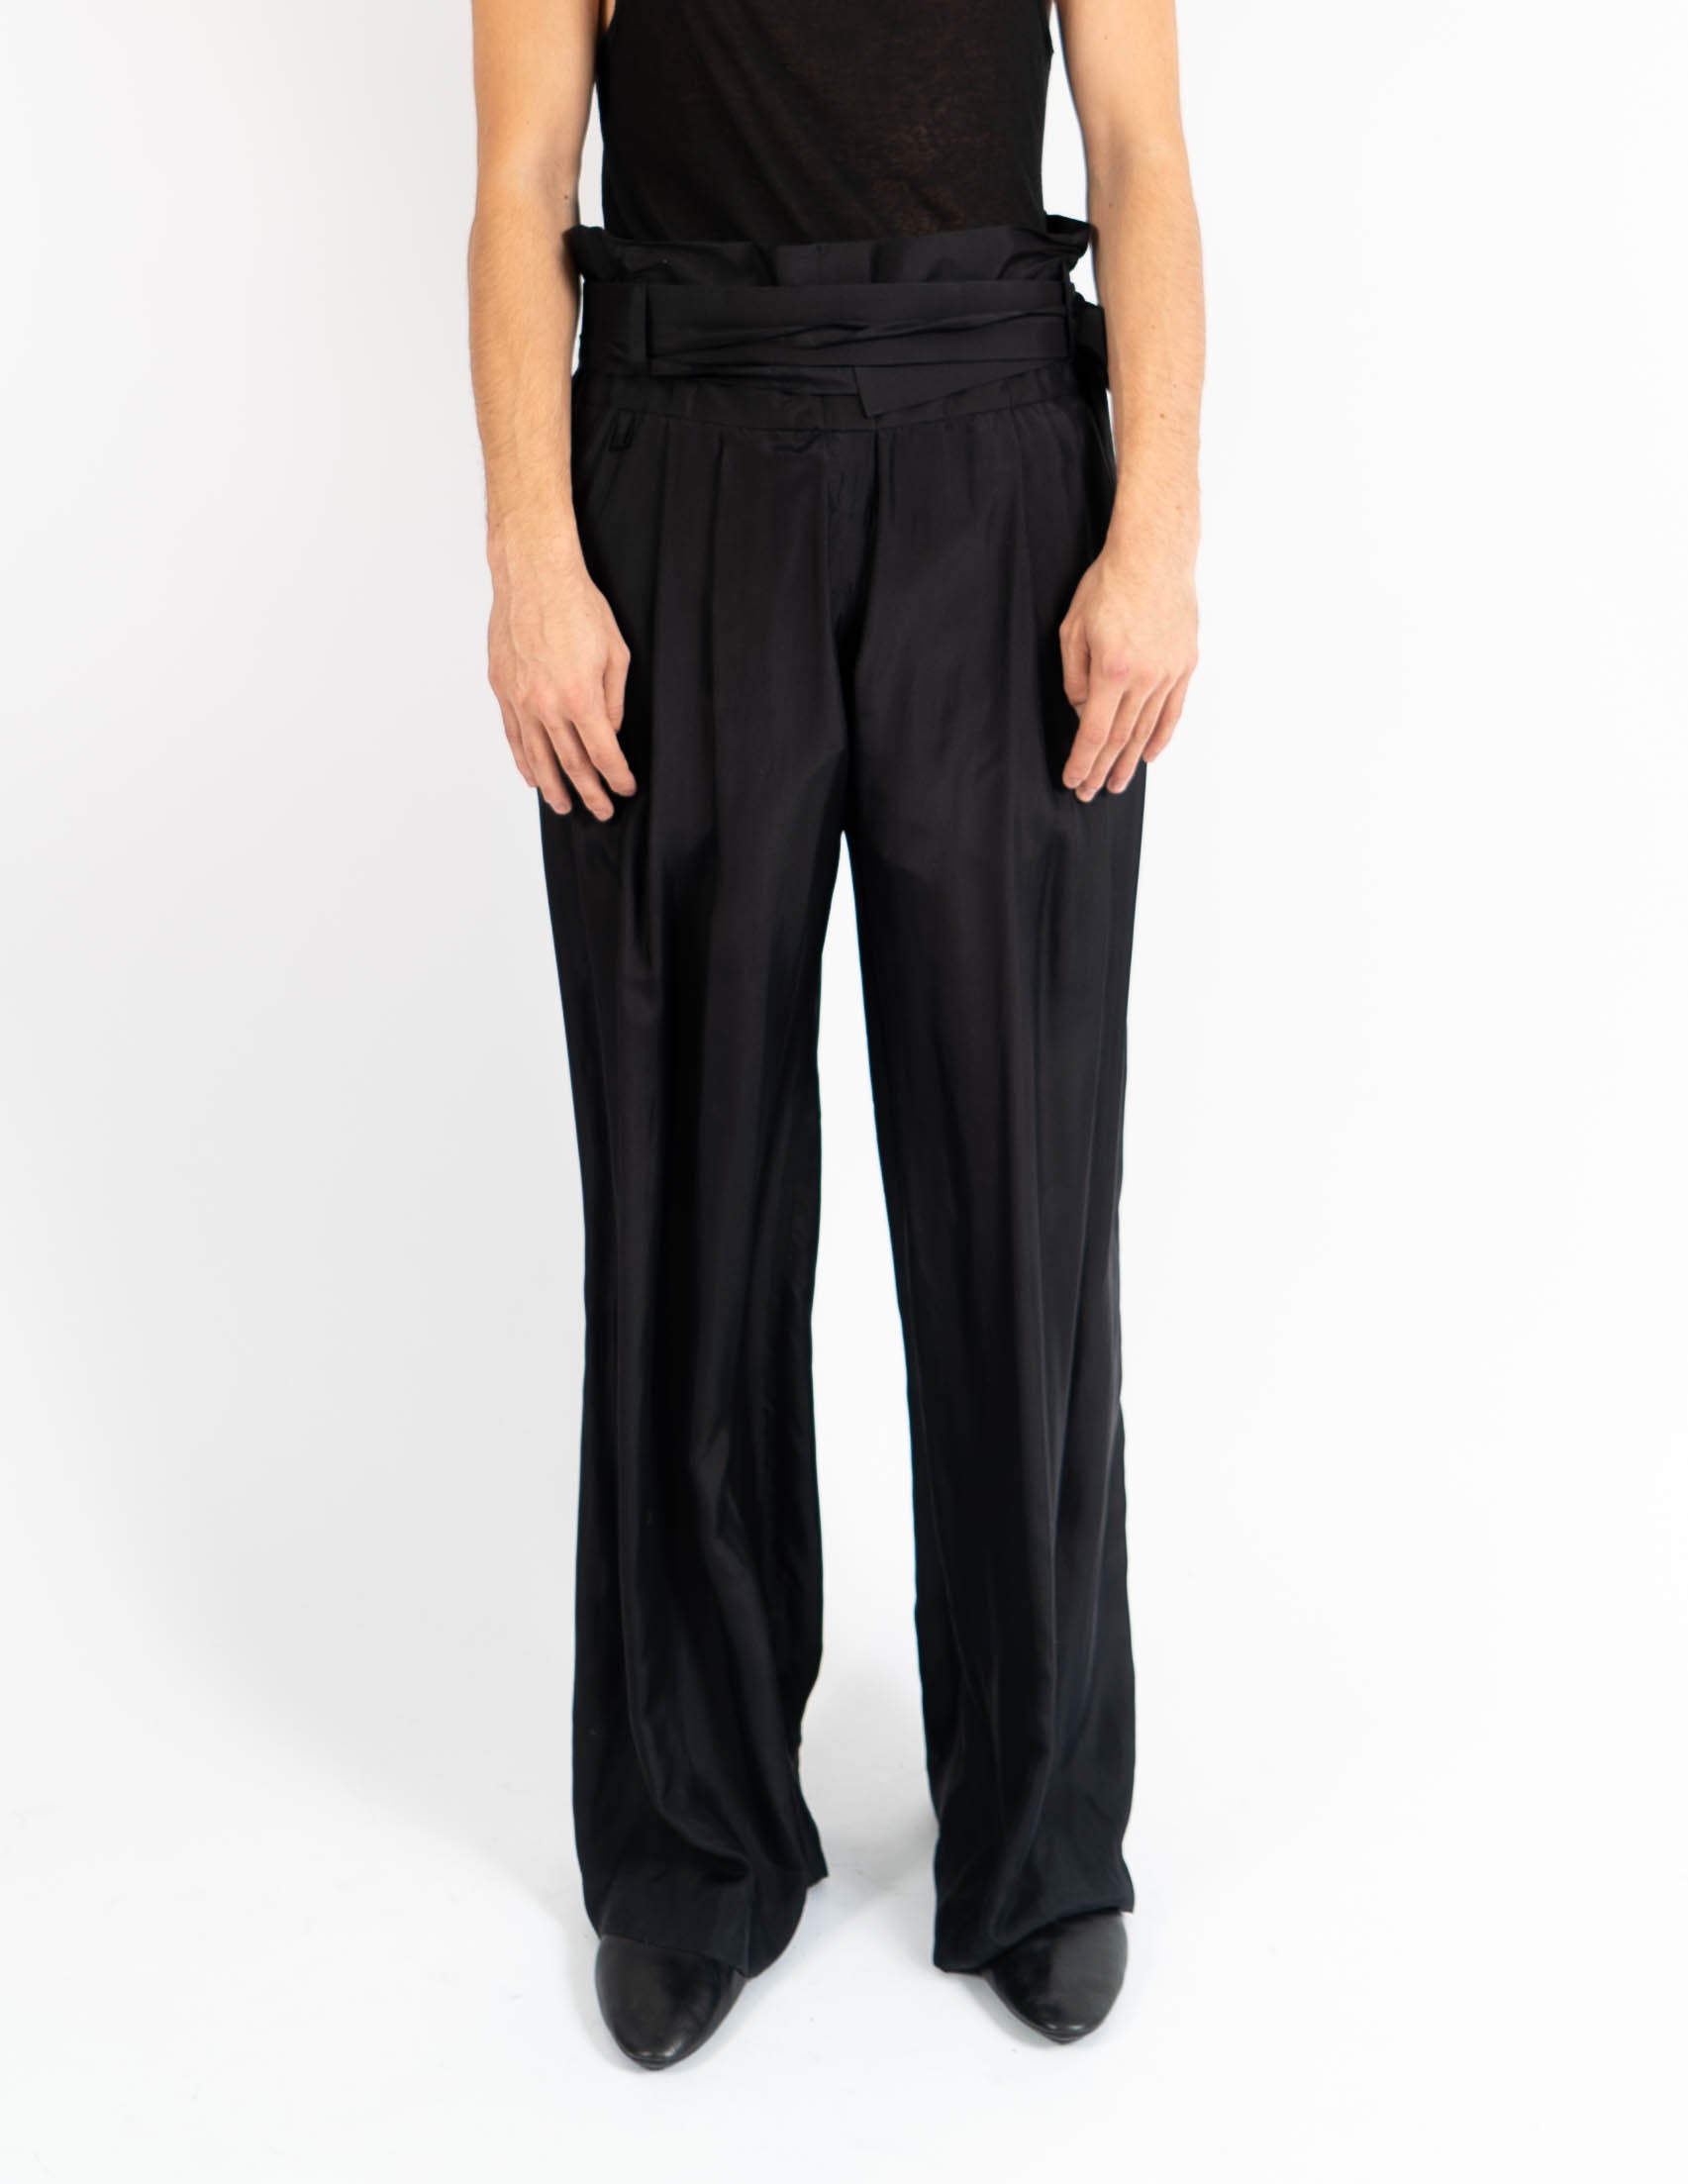 SS07 Black Belted Oversized Silk Trousers